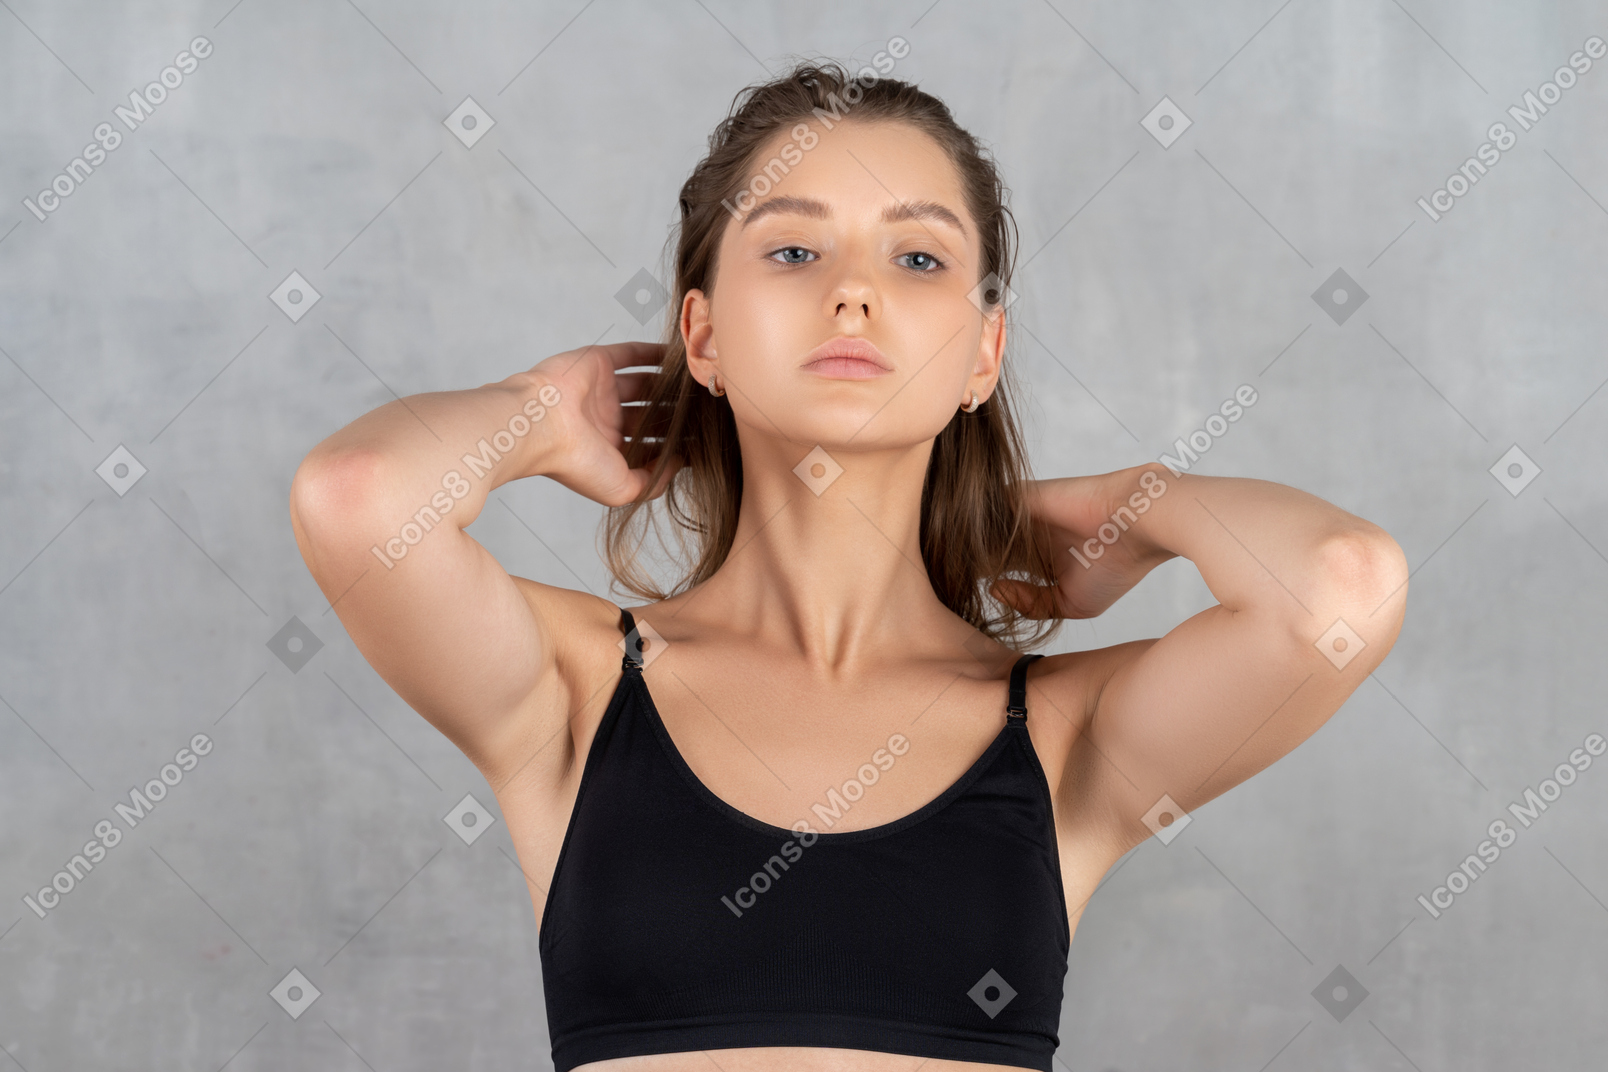 Young woman posing with hands behind her head